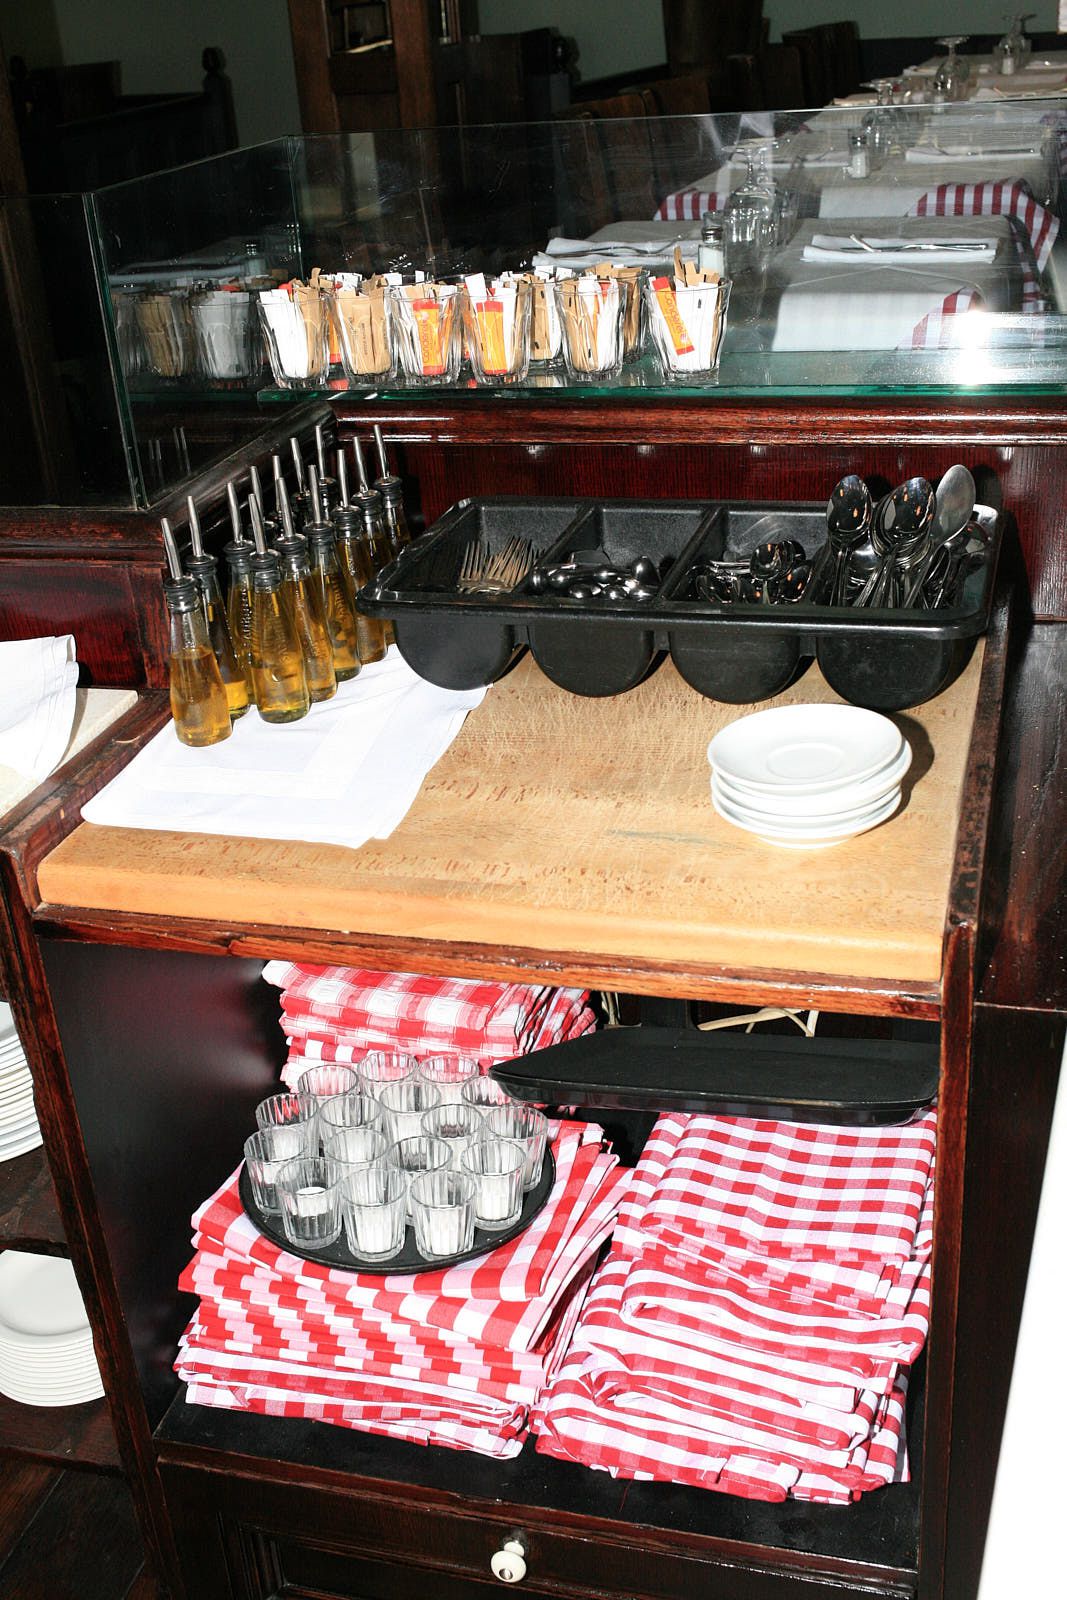 A bar cart stocked with cutlery, tablecloths, napkins, and gingham drapes.